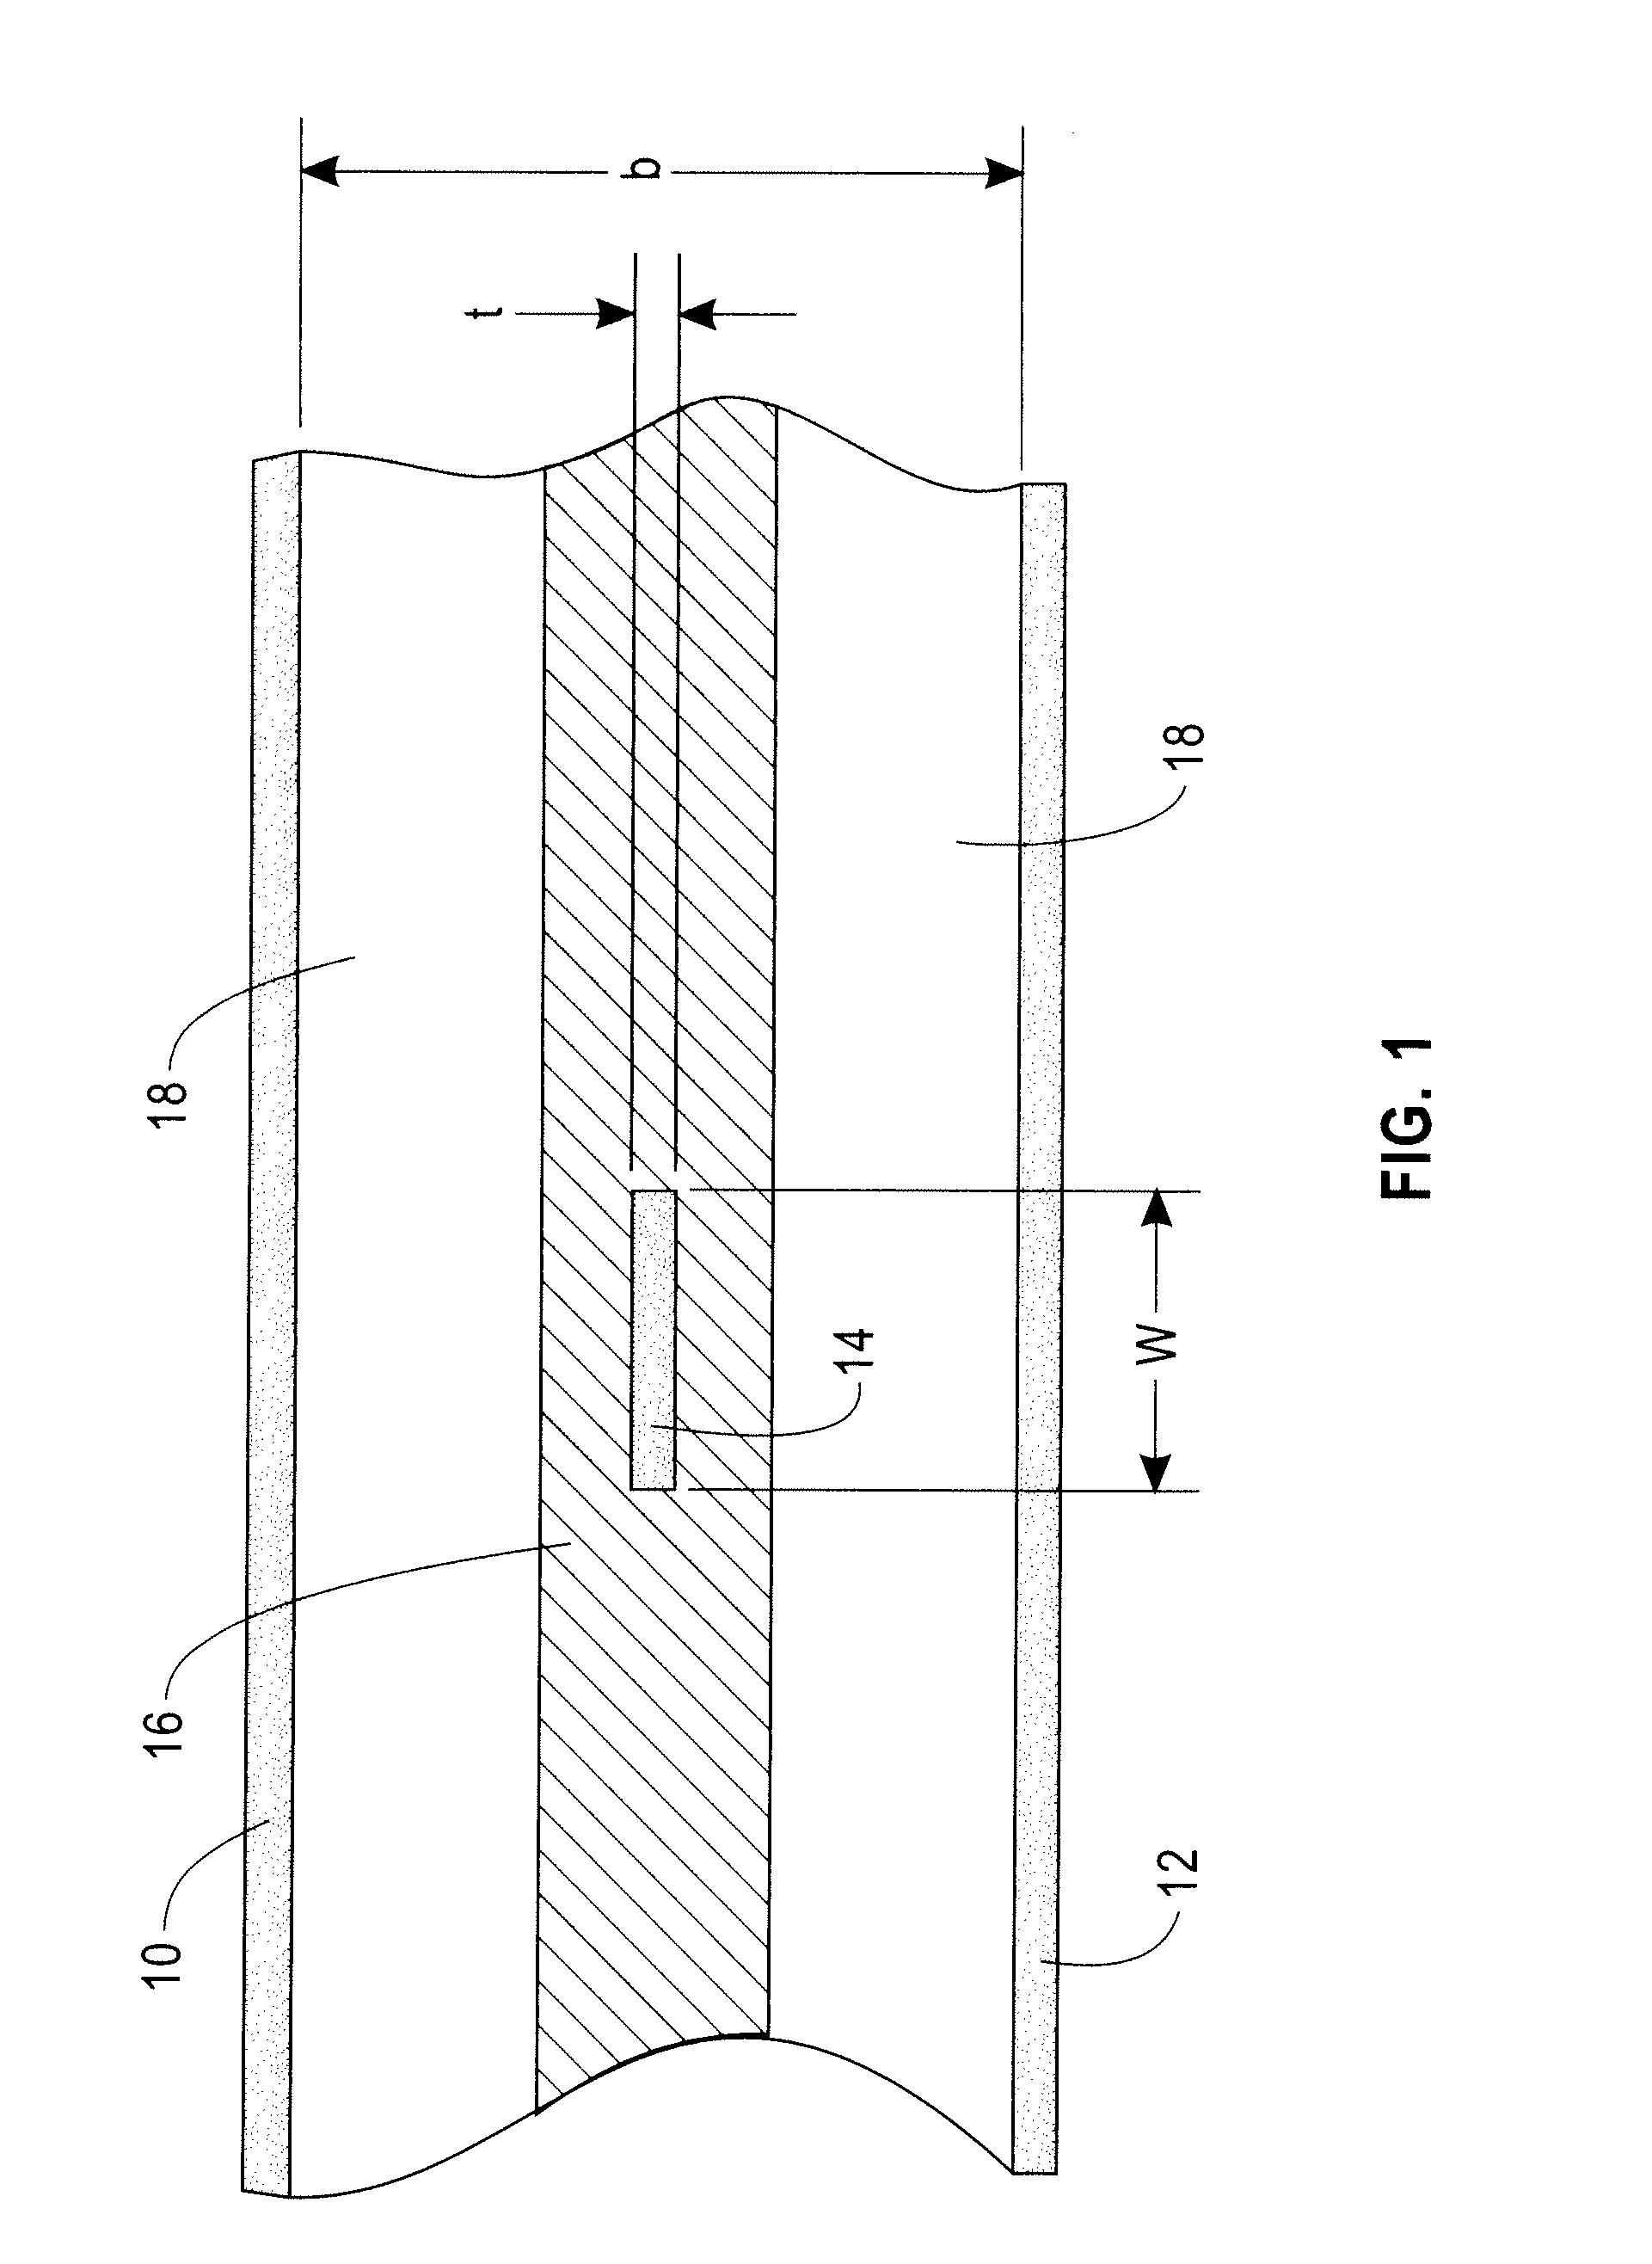 Fixed impedance low pass metal powder filter with a planar buried stripline geometry